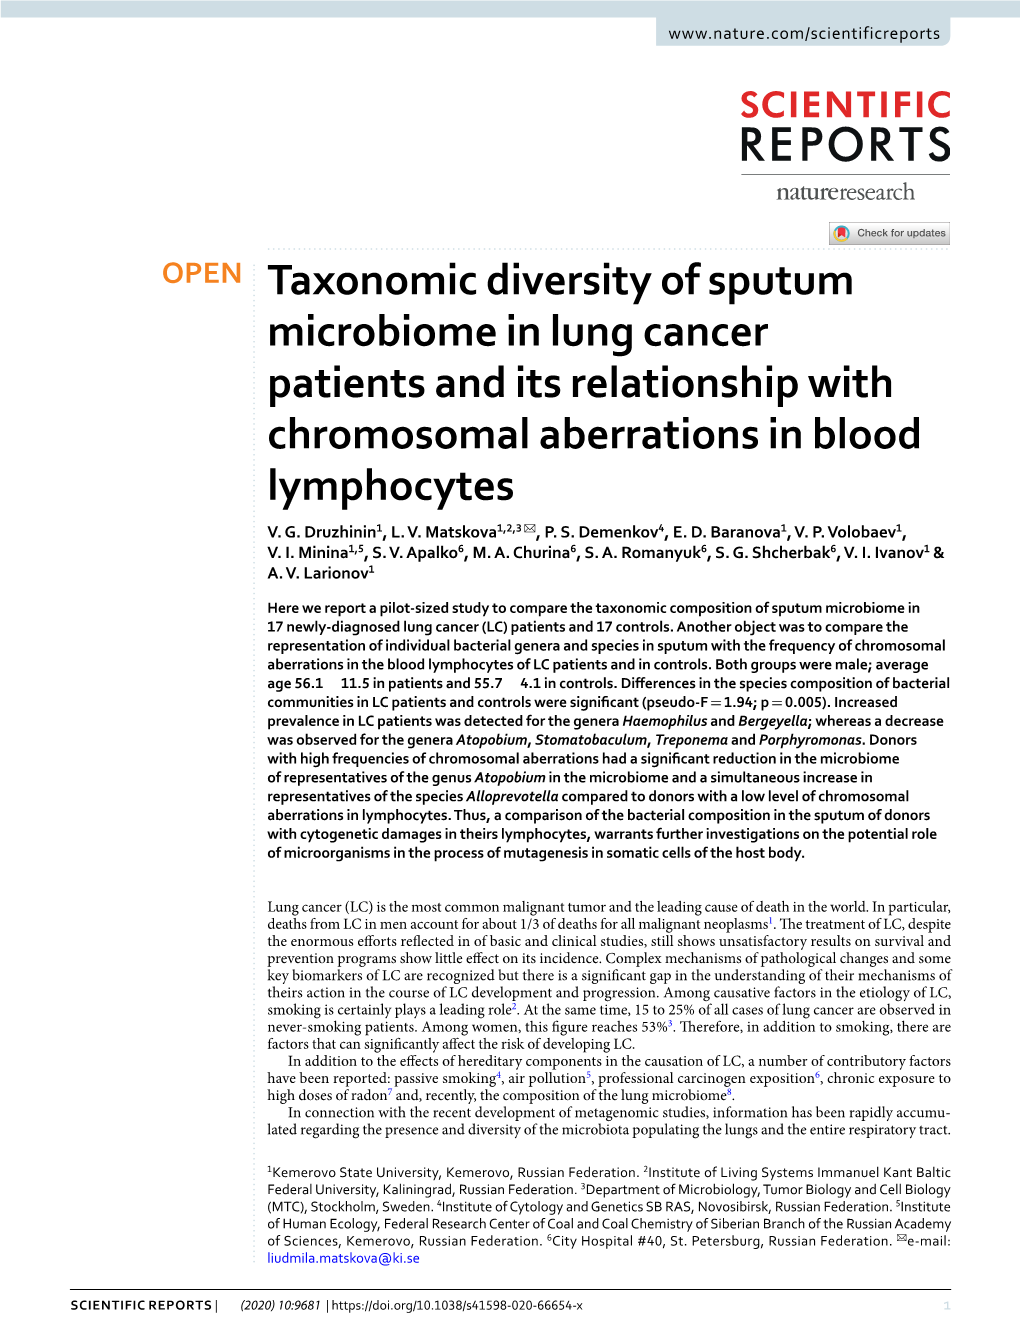 Taxonomic Diversity of Sputum Microbiome in Lung Cancer Patients and Its Relationship with Chromosomal Aberrations in Blood Lymphocytes V